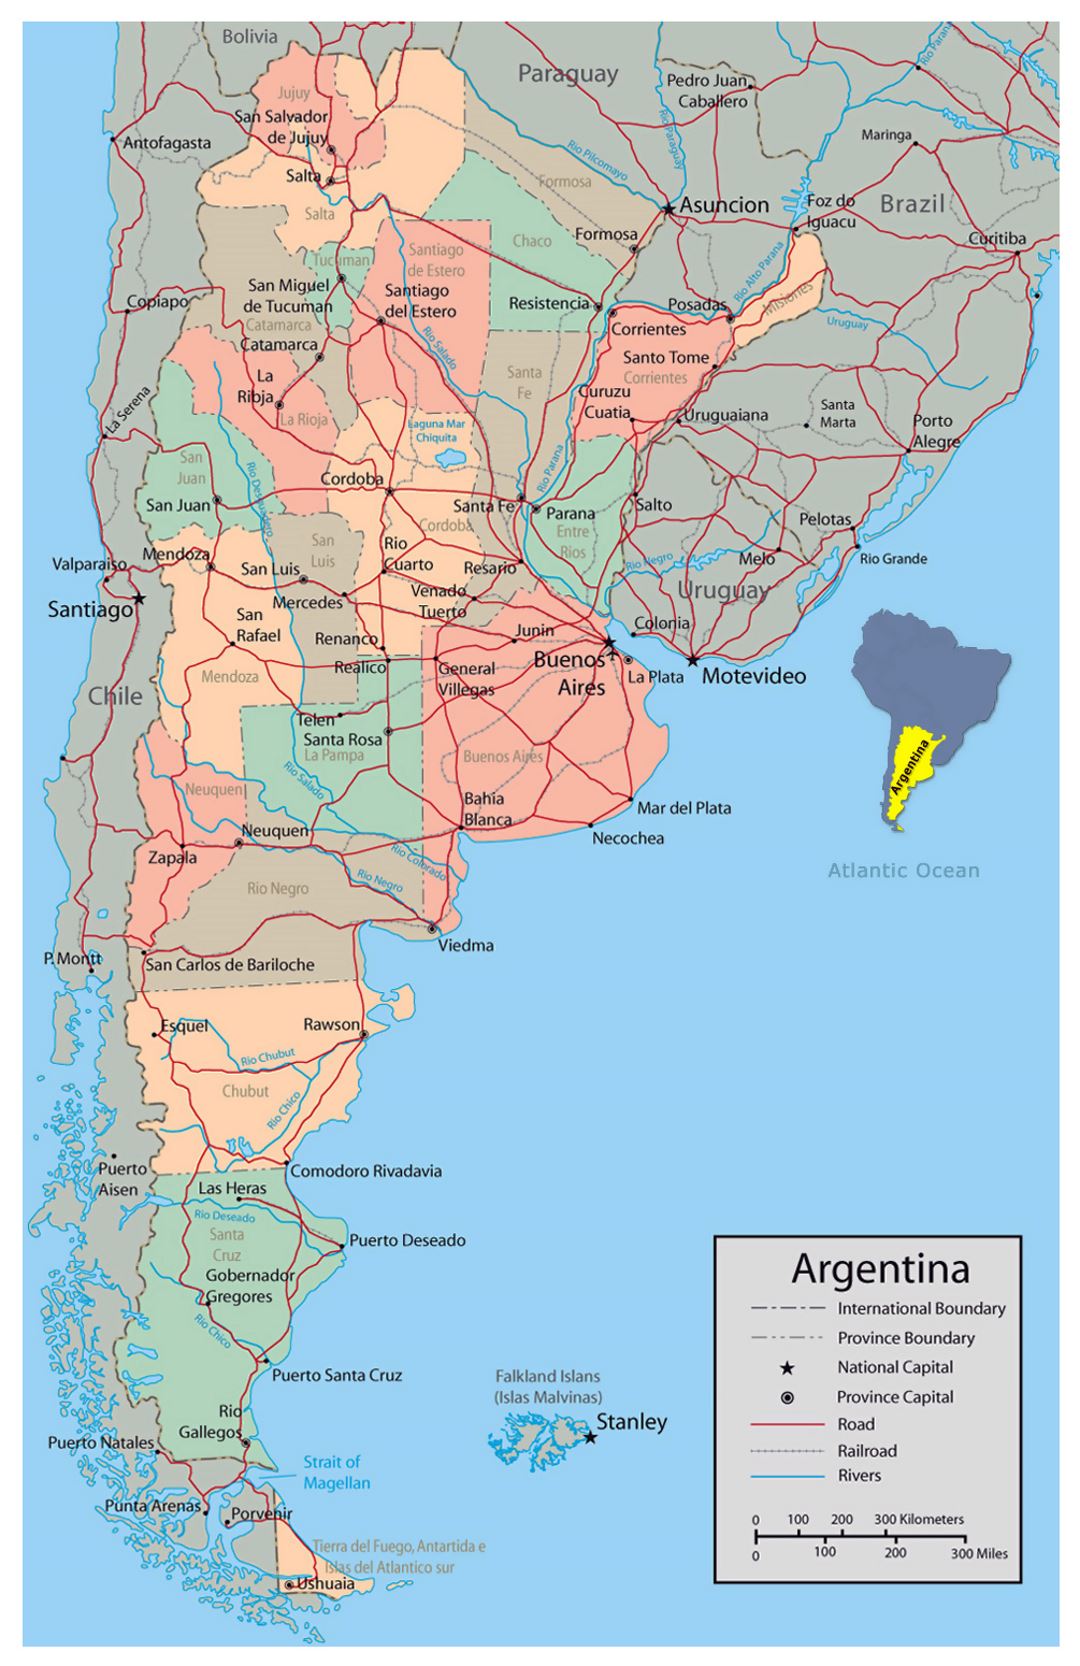 Detailed political and administrative map of Argentina with major roads and major cities